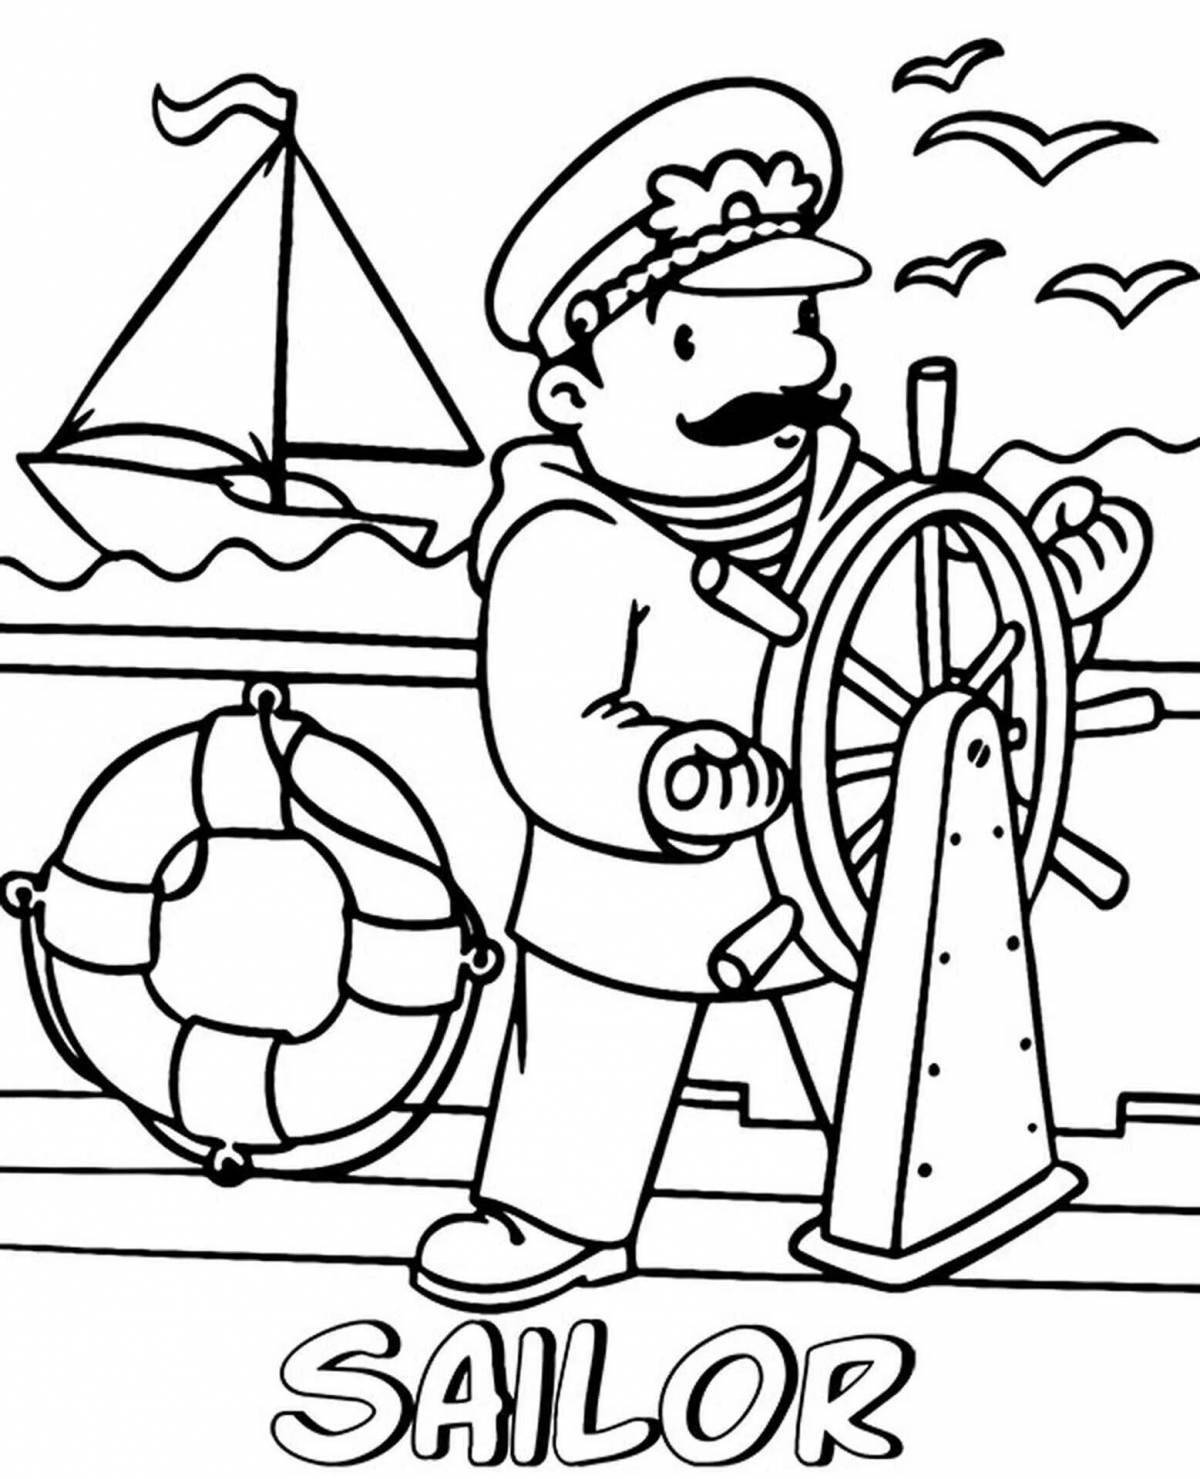 Colorful-sailor-image sailor coloring book for kids